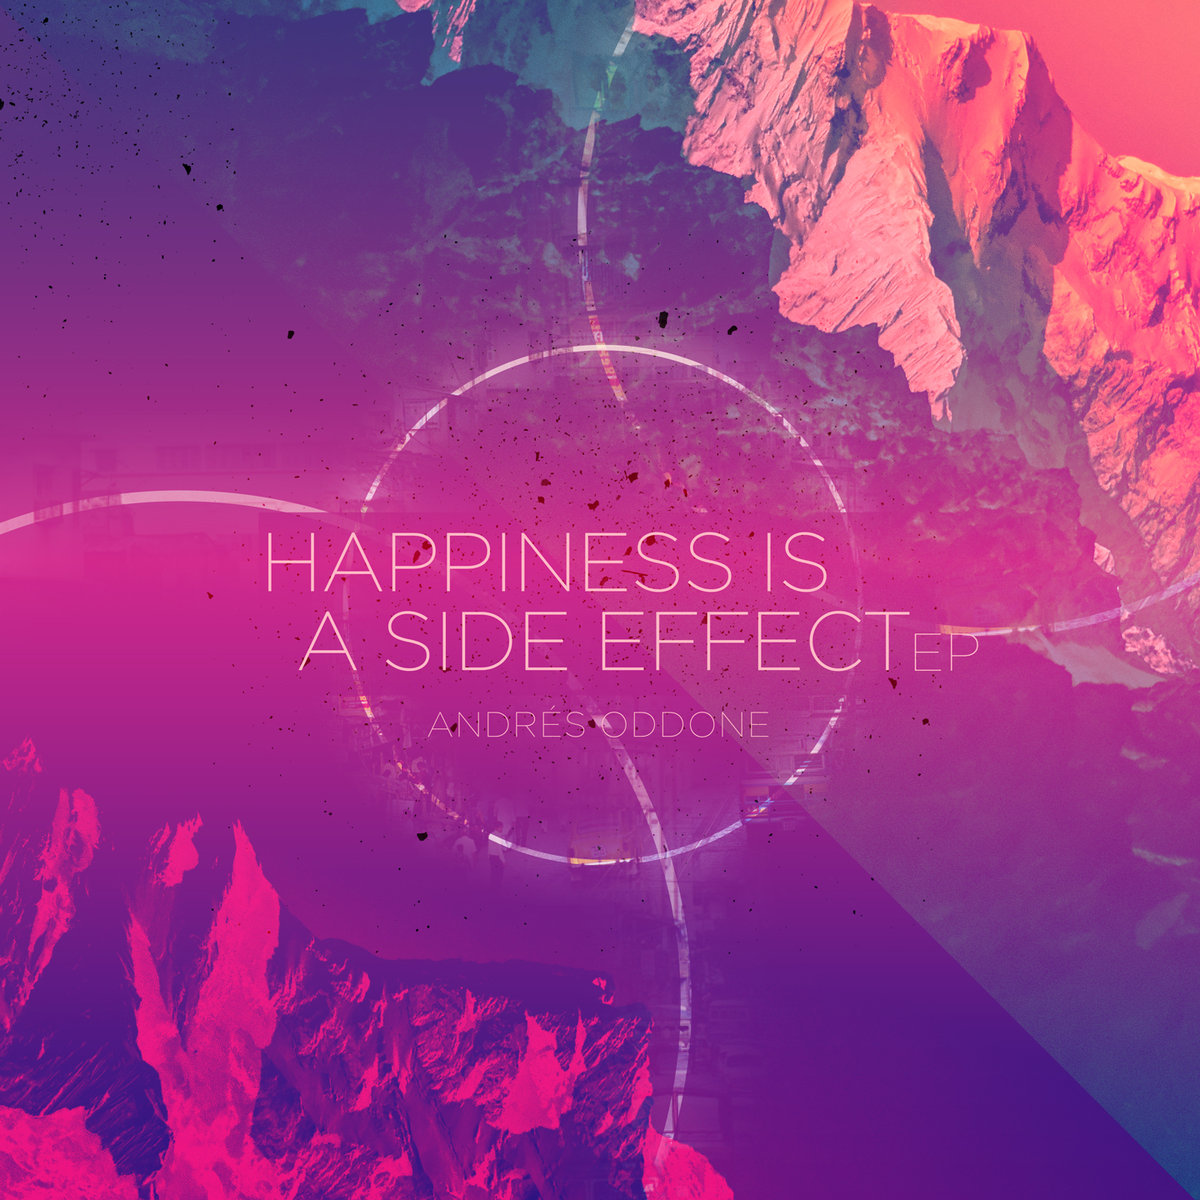 Andrés Oddone – Happiness is a side effect